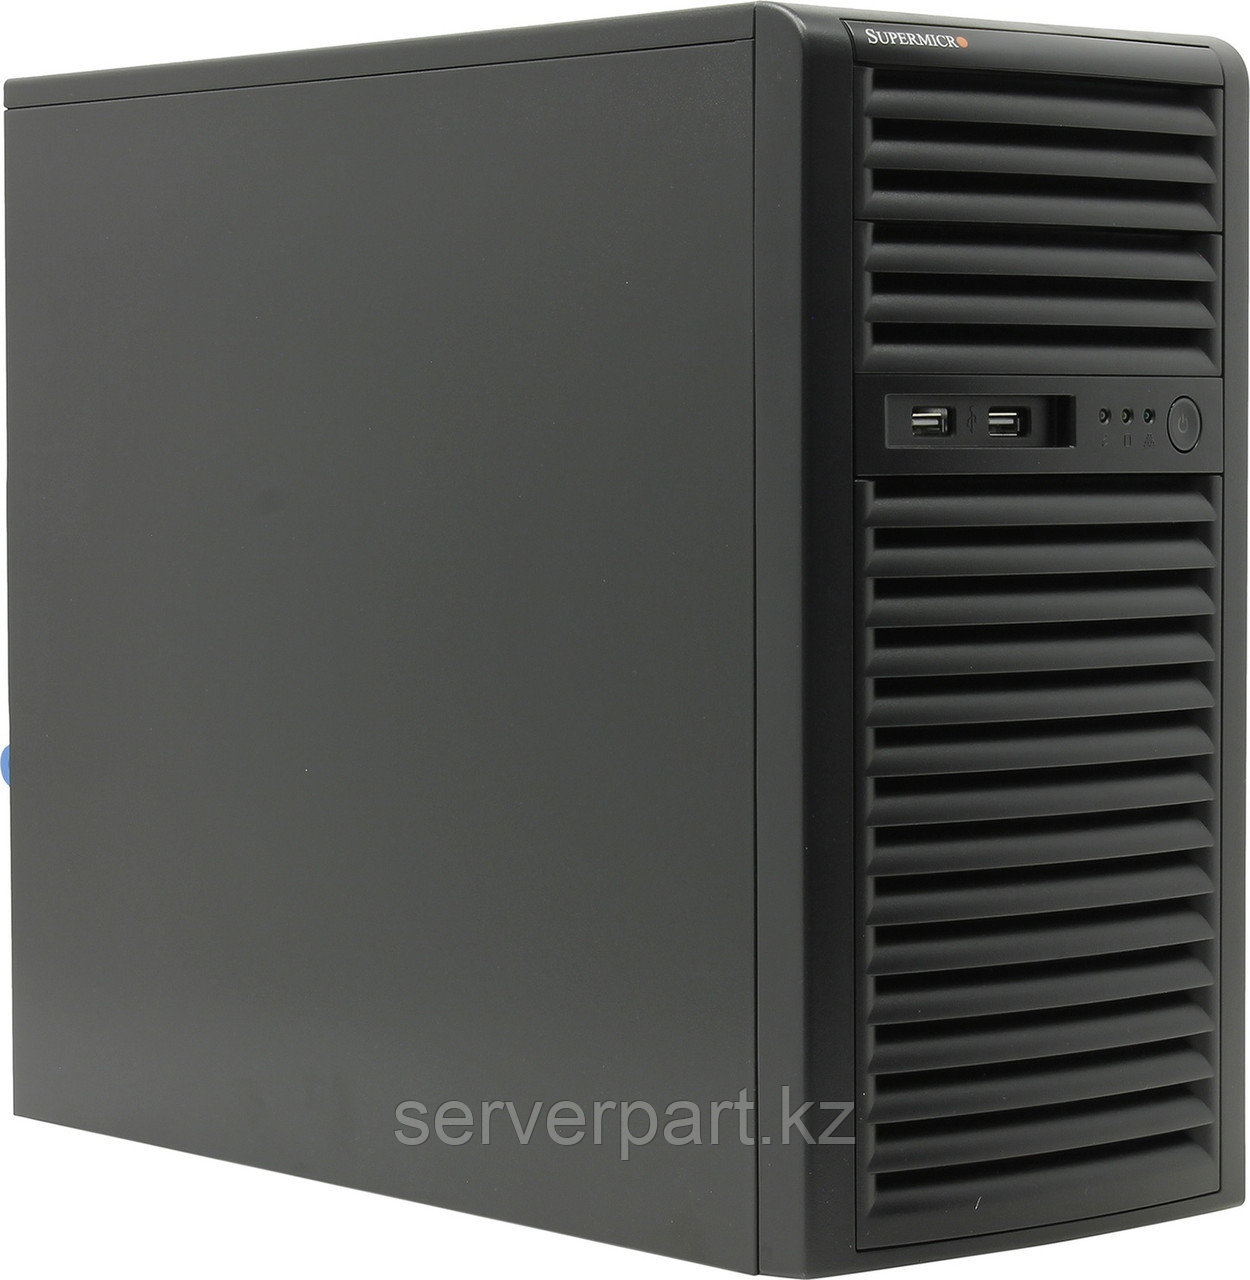 Сервер Supermicro SYS-5039C Tower 4LFF/4-core intel xeon E2124 3.3GHz/48GB EUDIMM/no HDD up-to 4